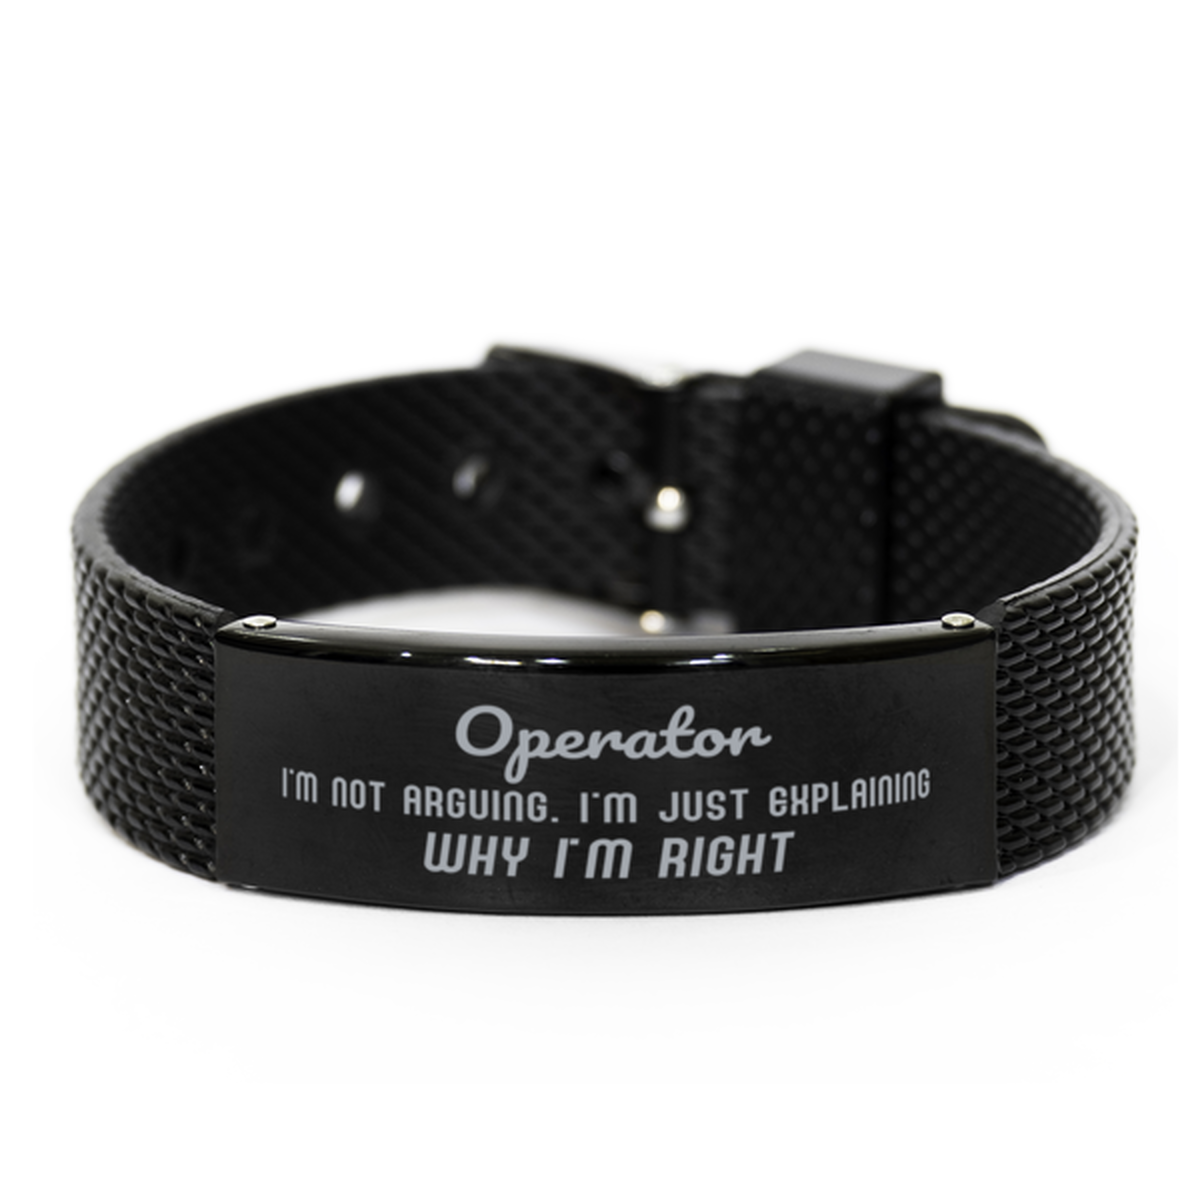 Operator I'm not Arguing. I'm Just Explaining Why I'm RIGHT Black Shark Mesh Bracelet, Funny Saying Quote Operator Gifts For Operator Graduation Birthday Christmas Gifts for Men Women Coworker